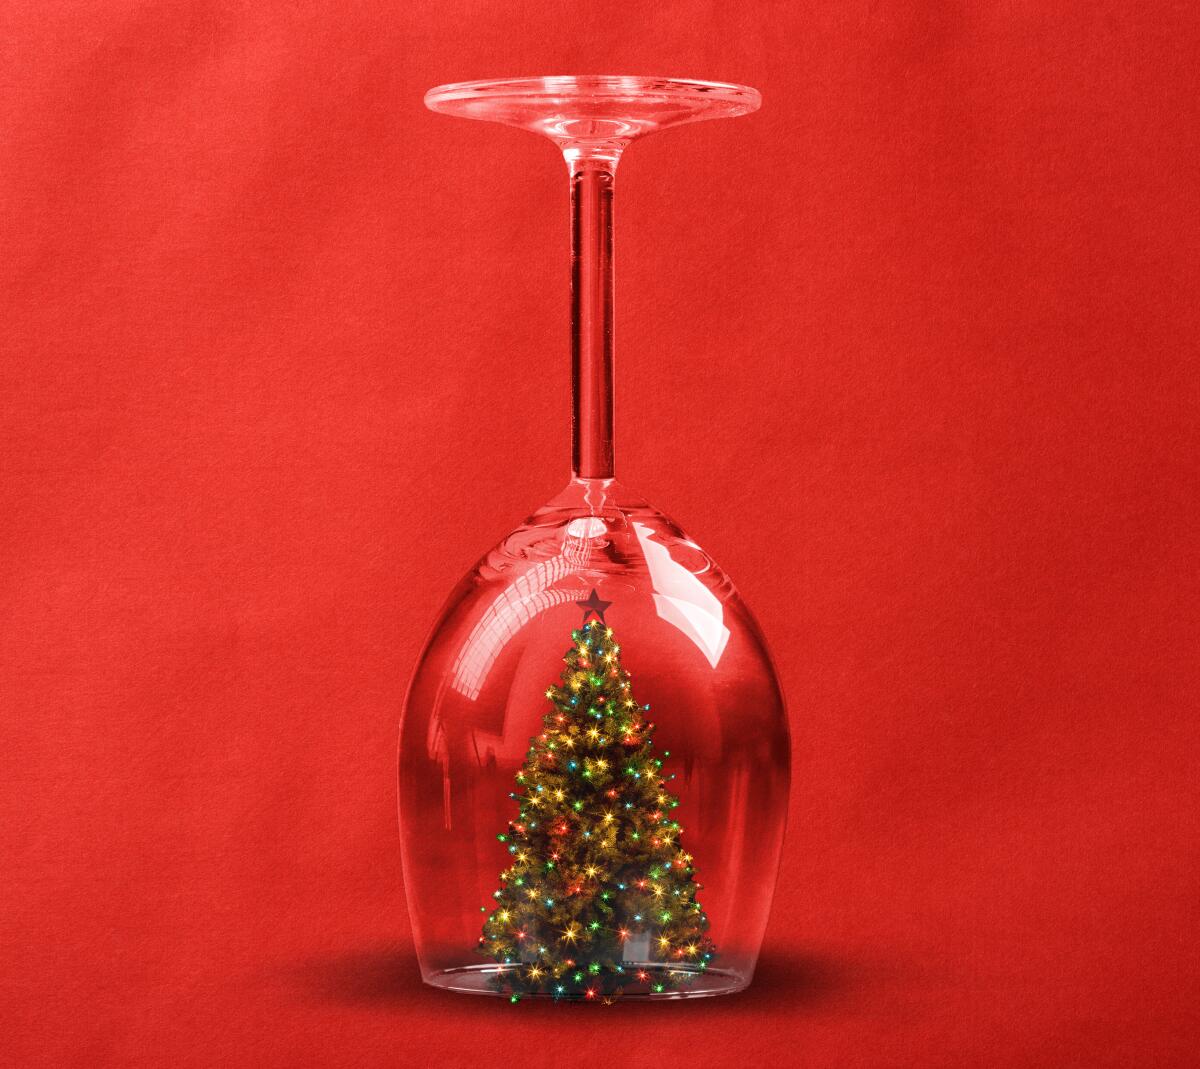 photo illustration of a christmas tree under an upside-down wine glass